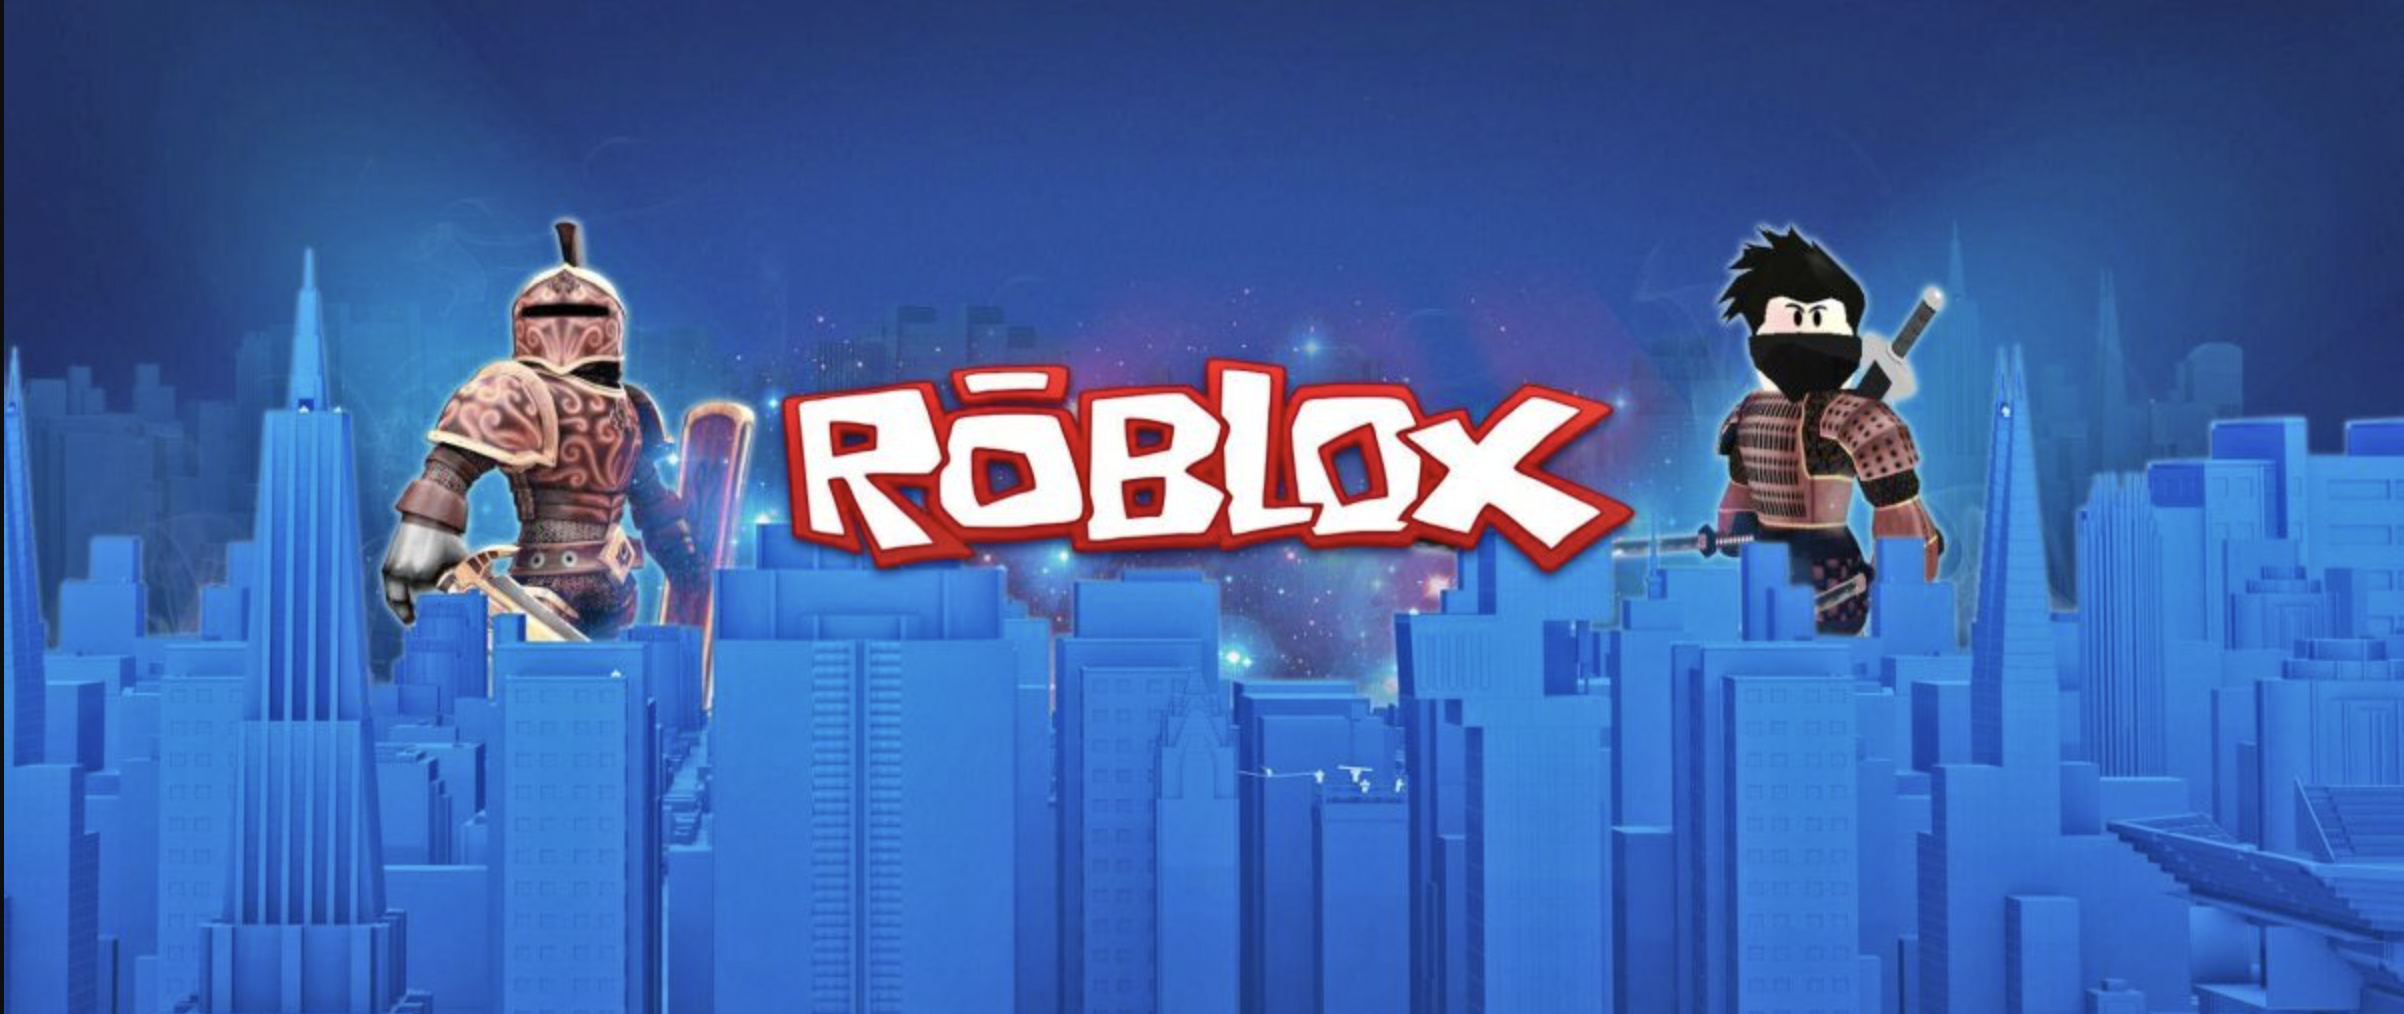 Roblox Free Account Login with 1000 Robux 